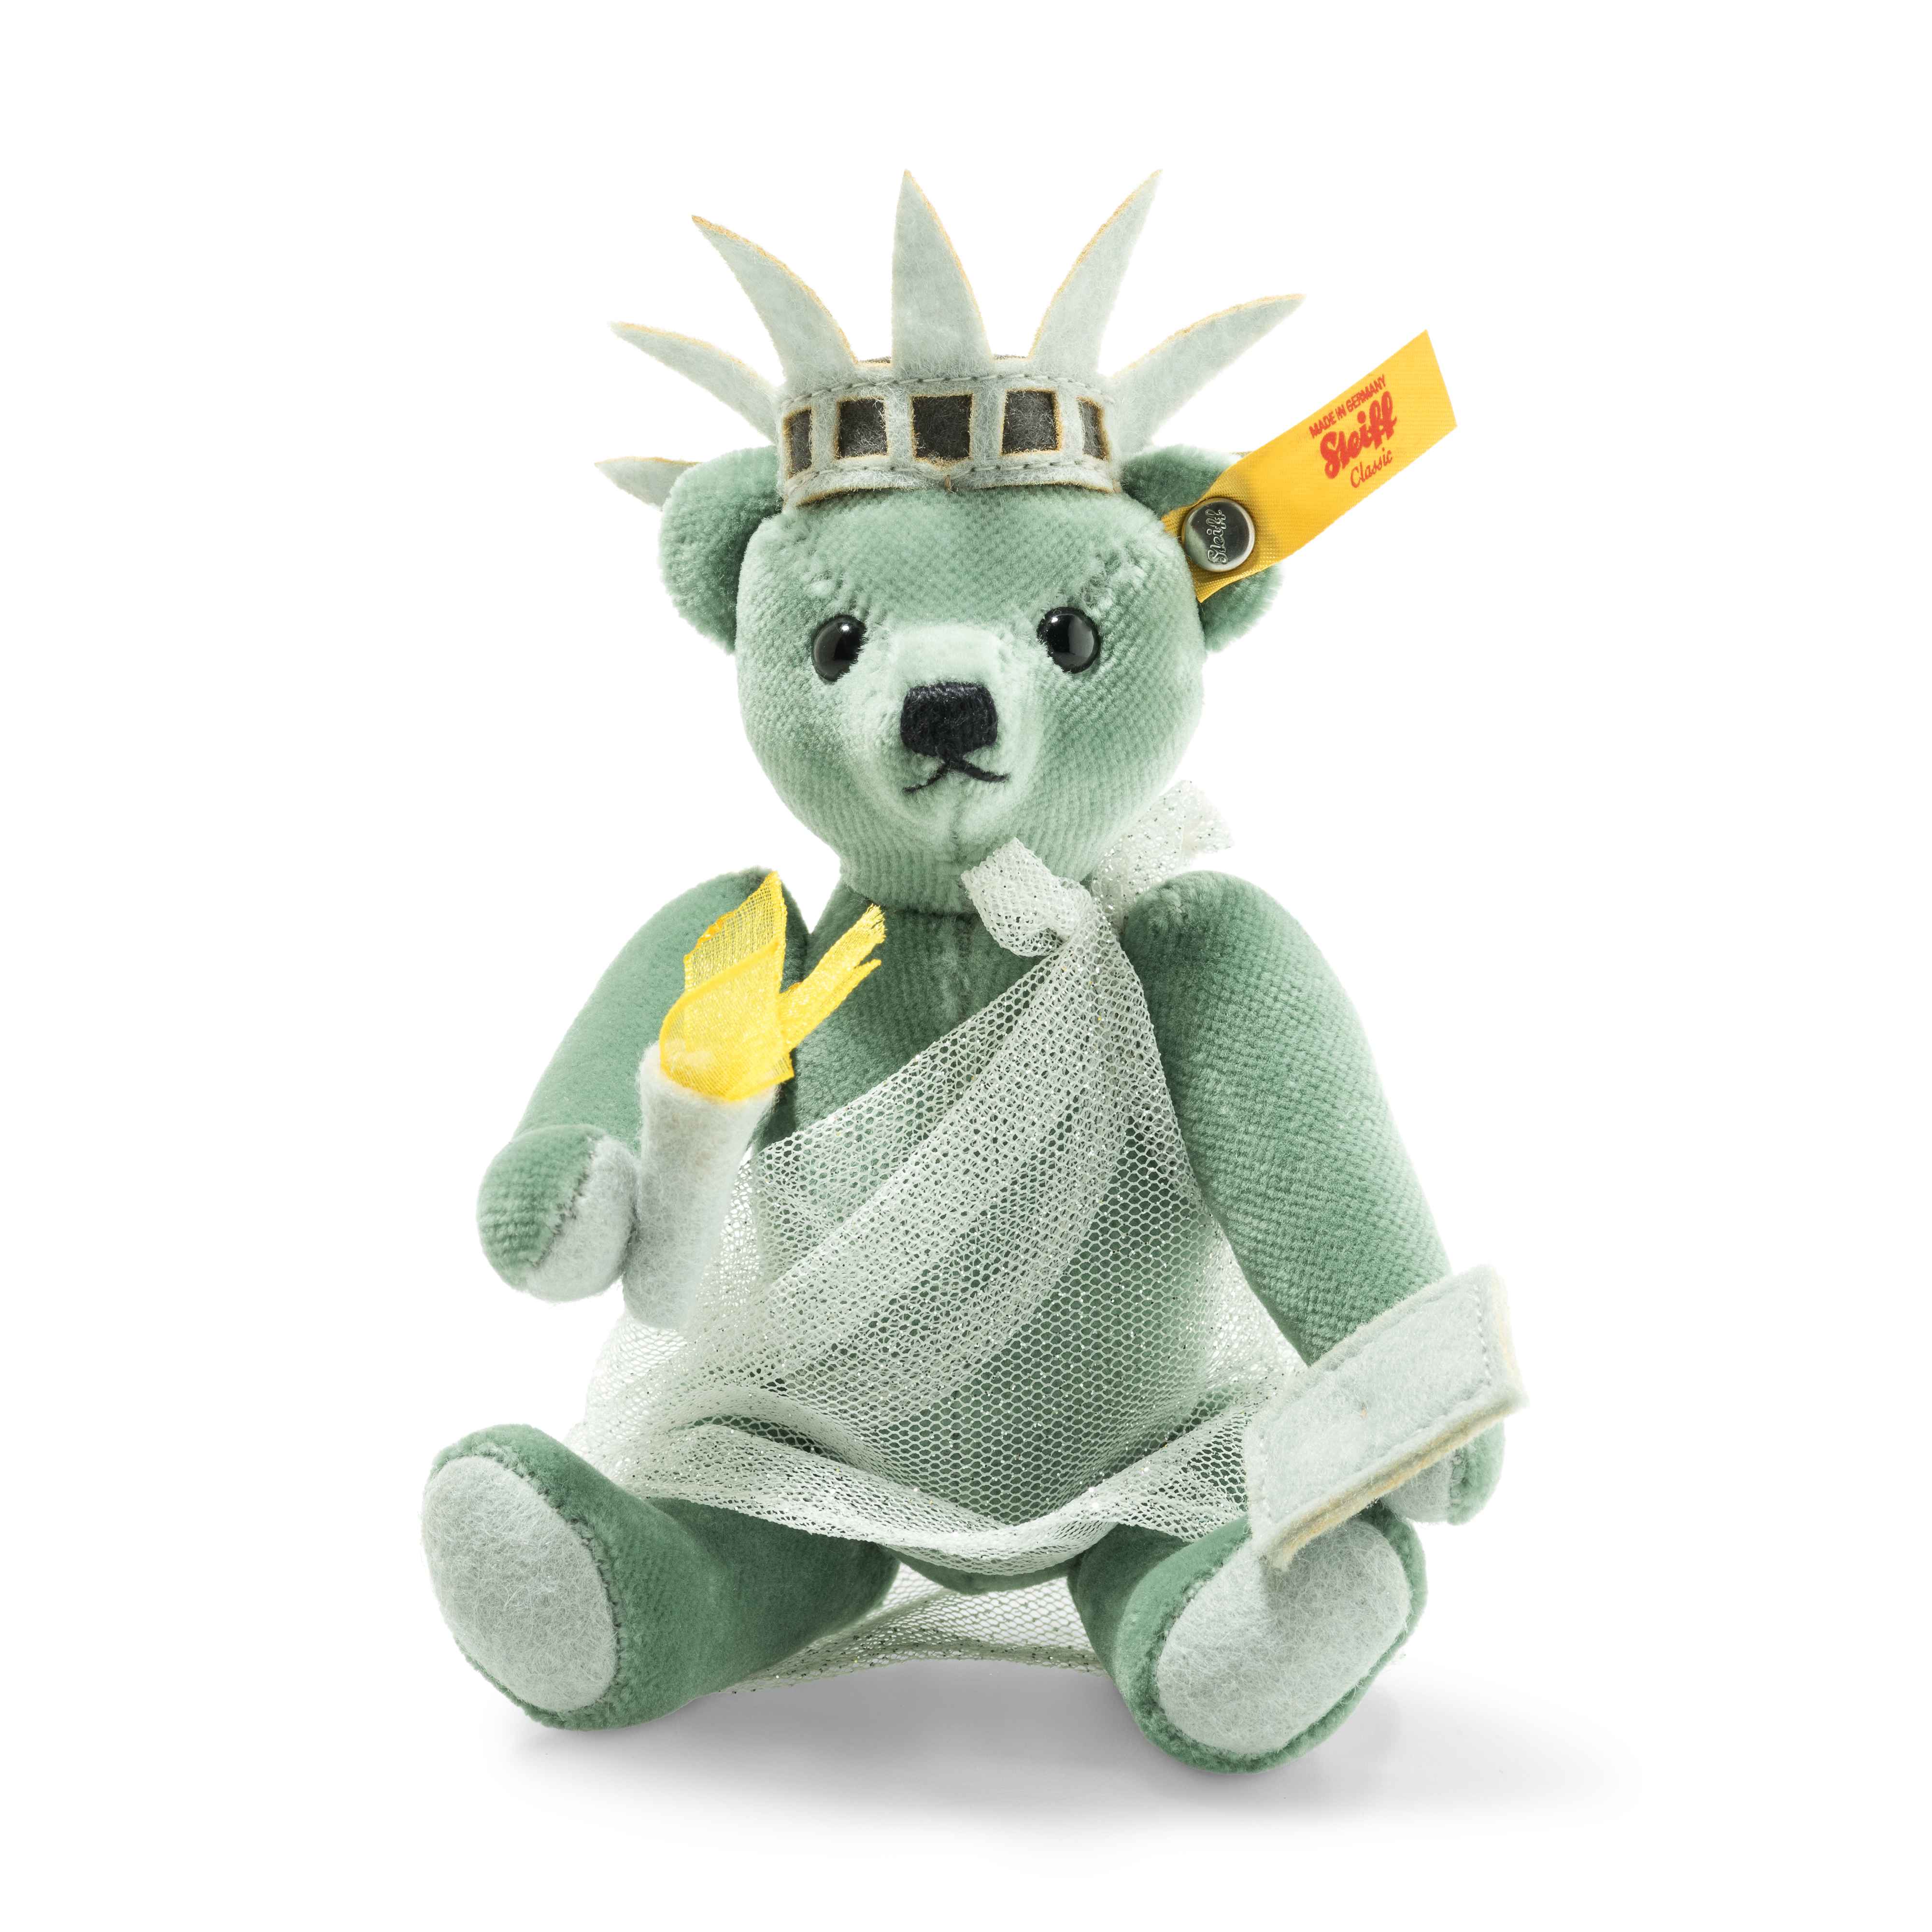 Steiff wճ}: Great Escapes New York Teddy Bear in Gift Box